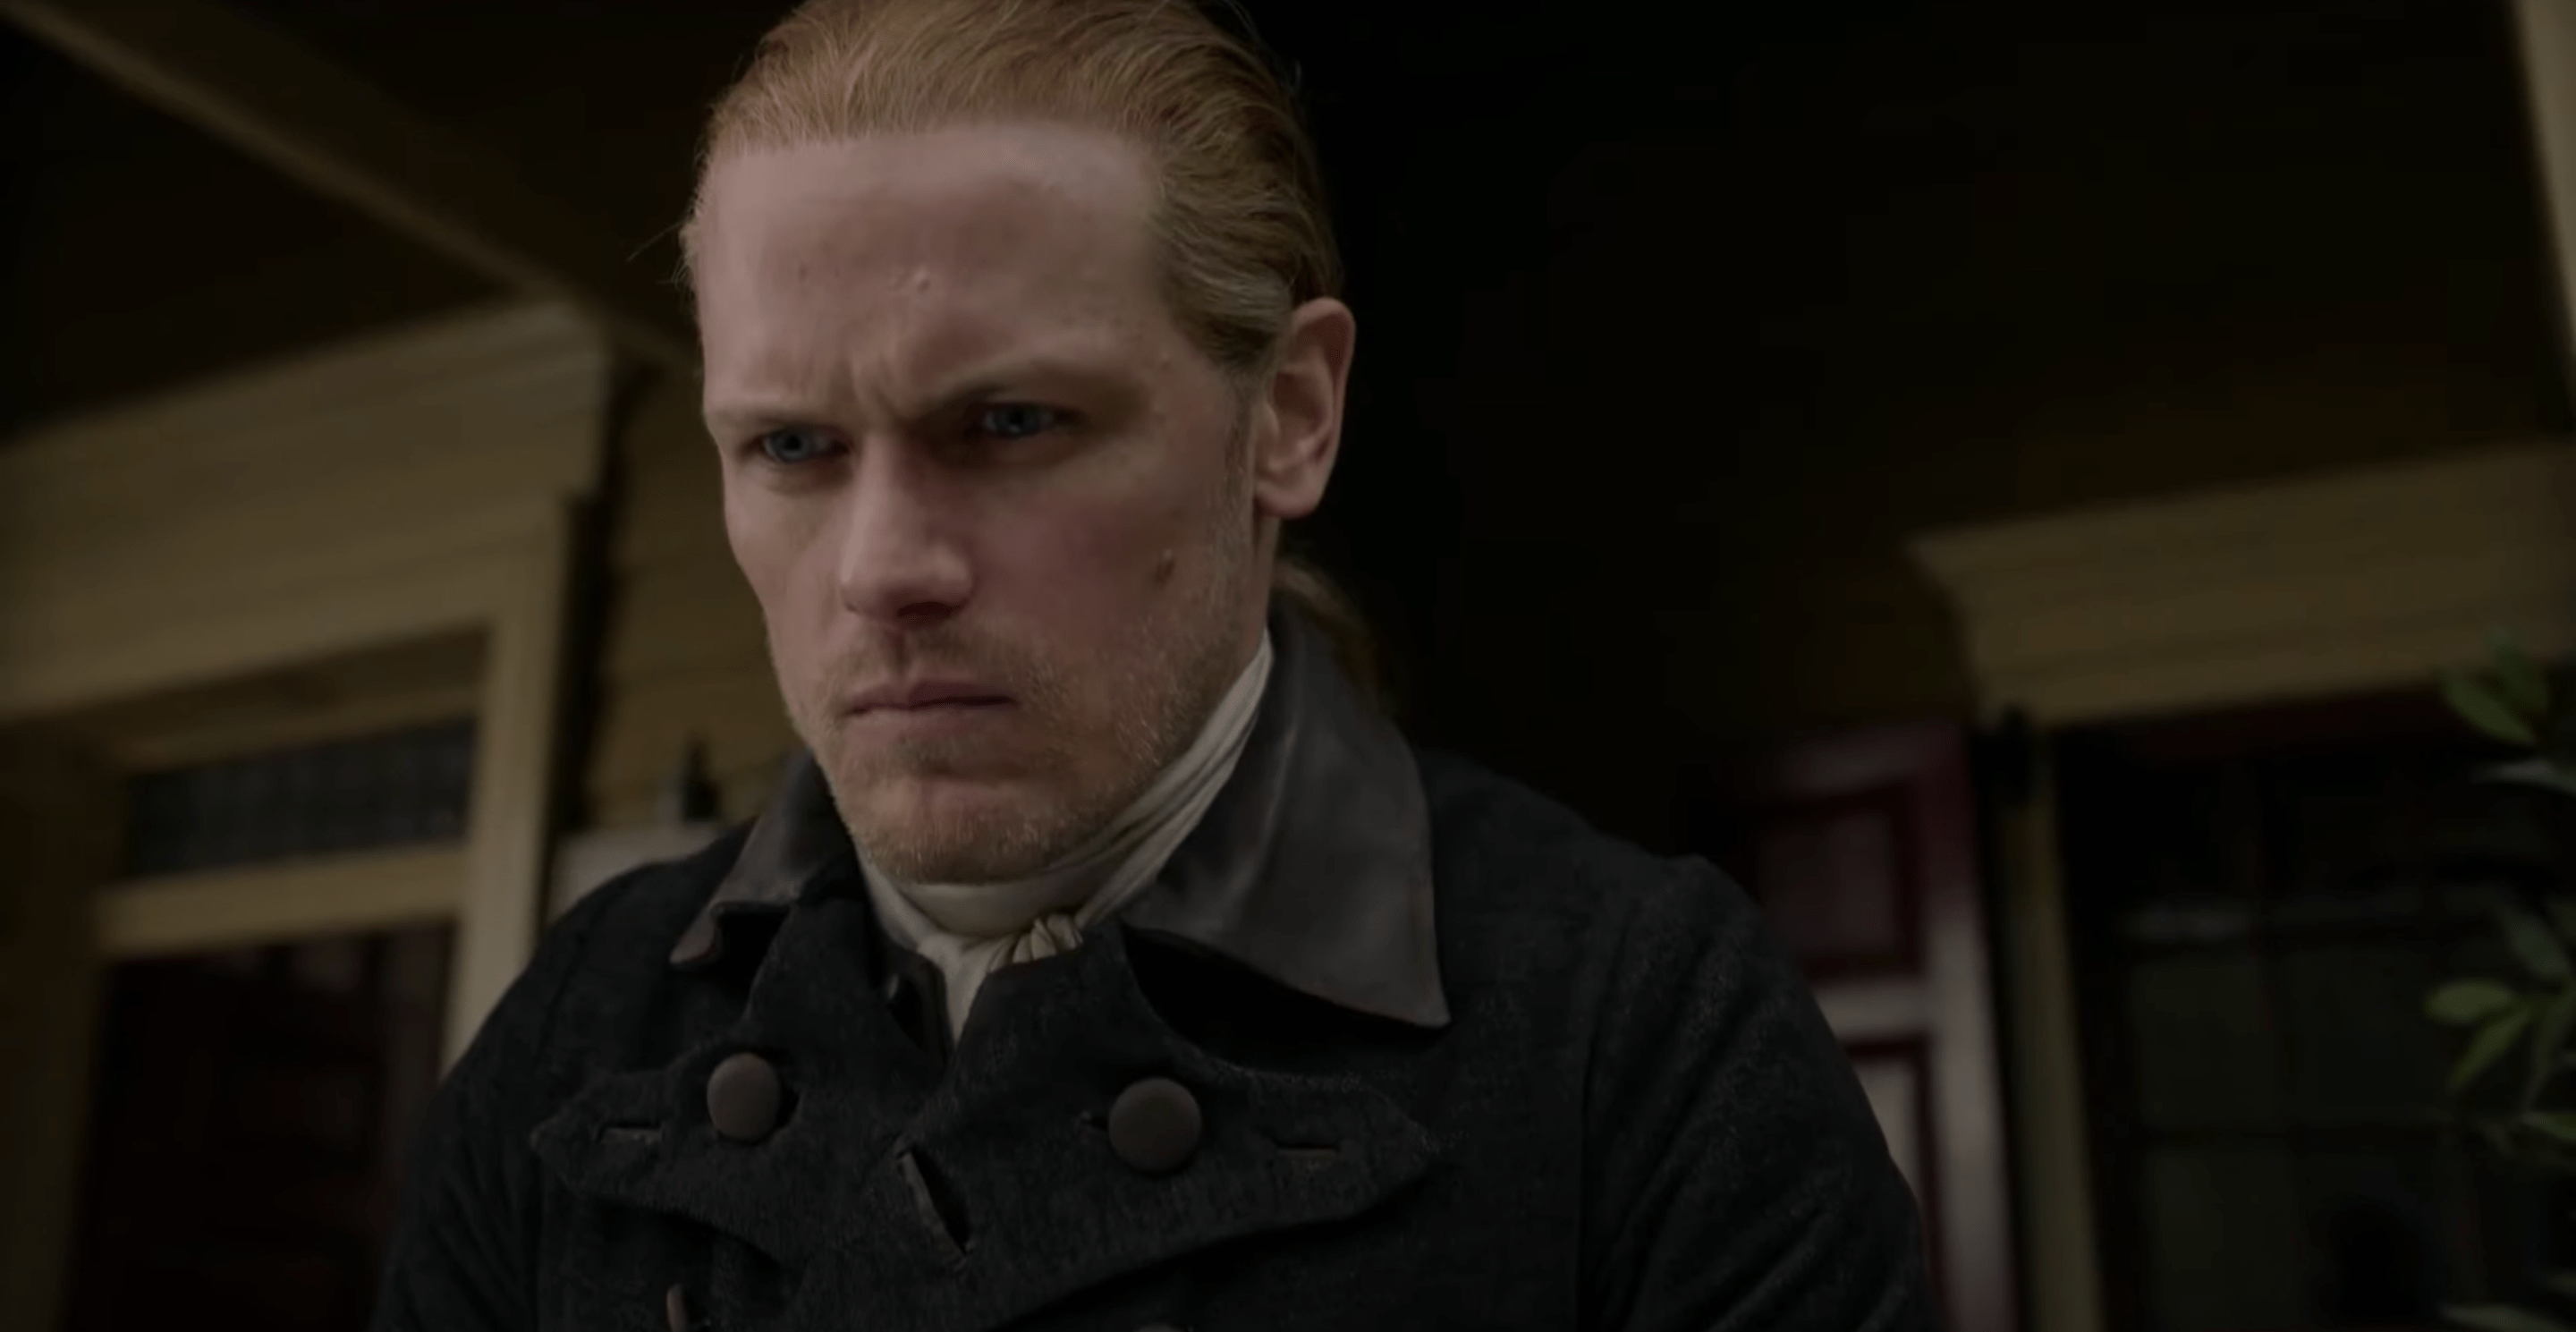 Outlander season 6 trailer: Claire and Jamie prepare for war as threat of revolution looms